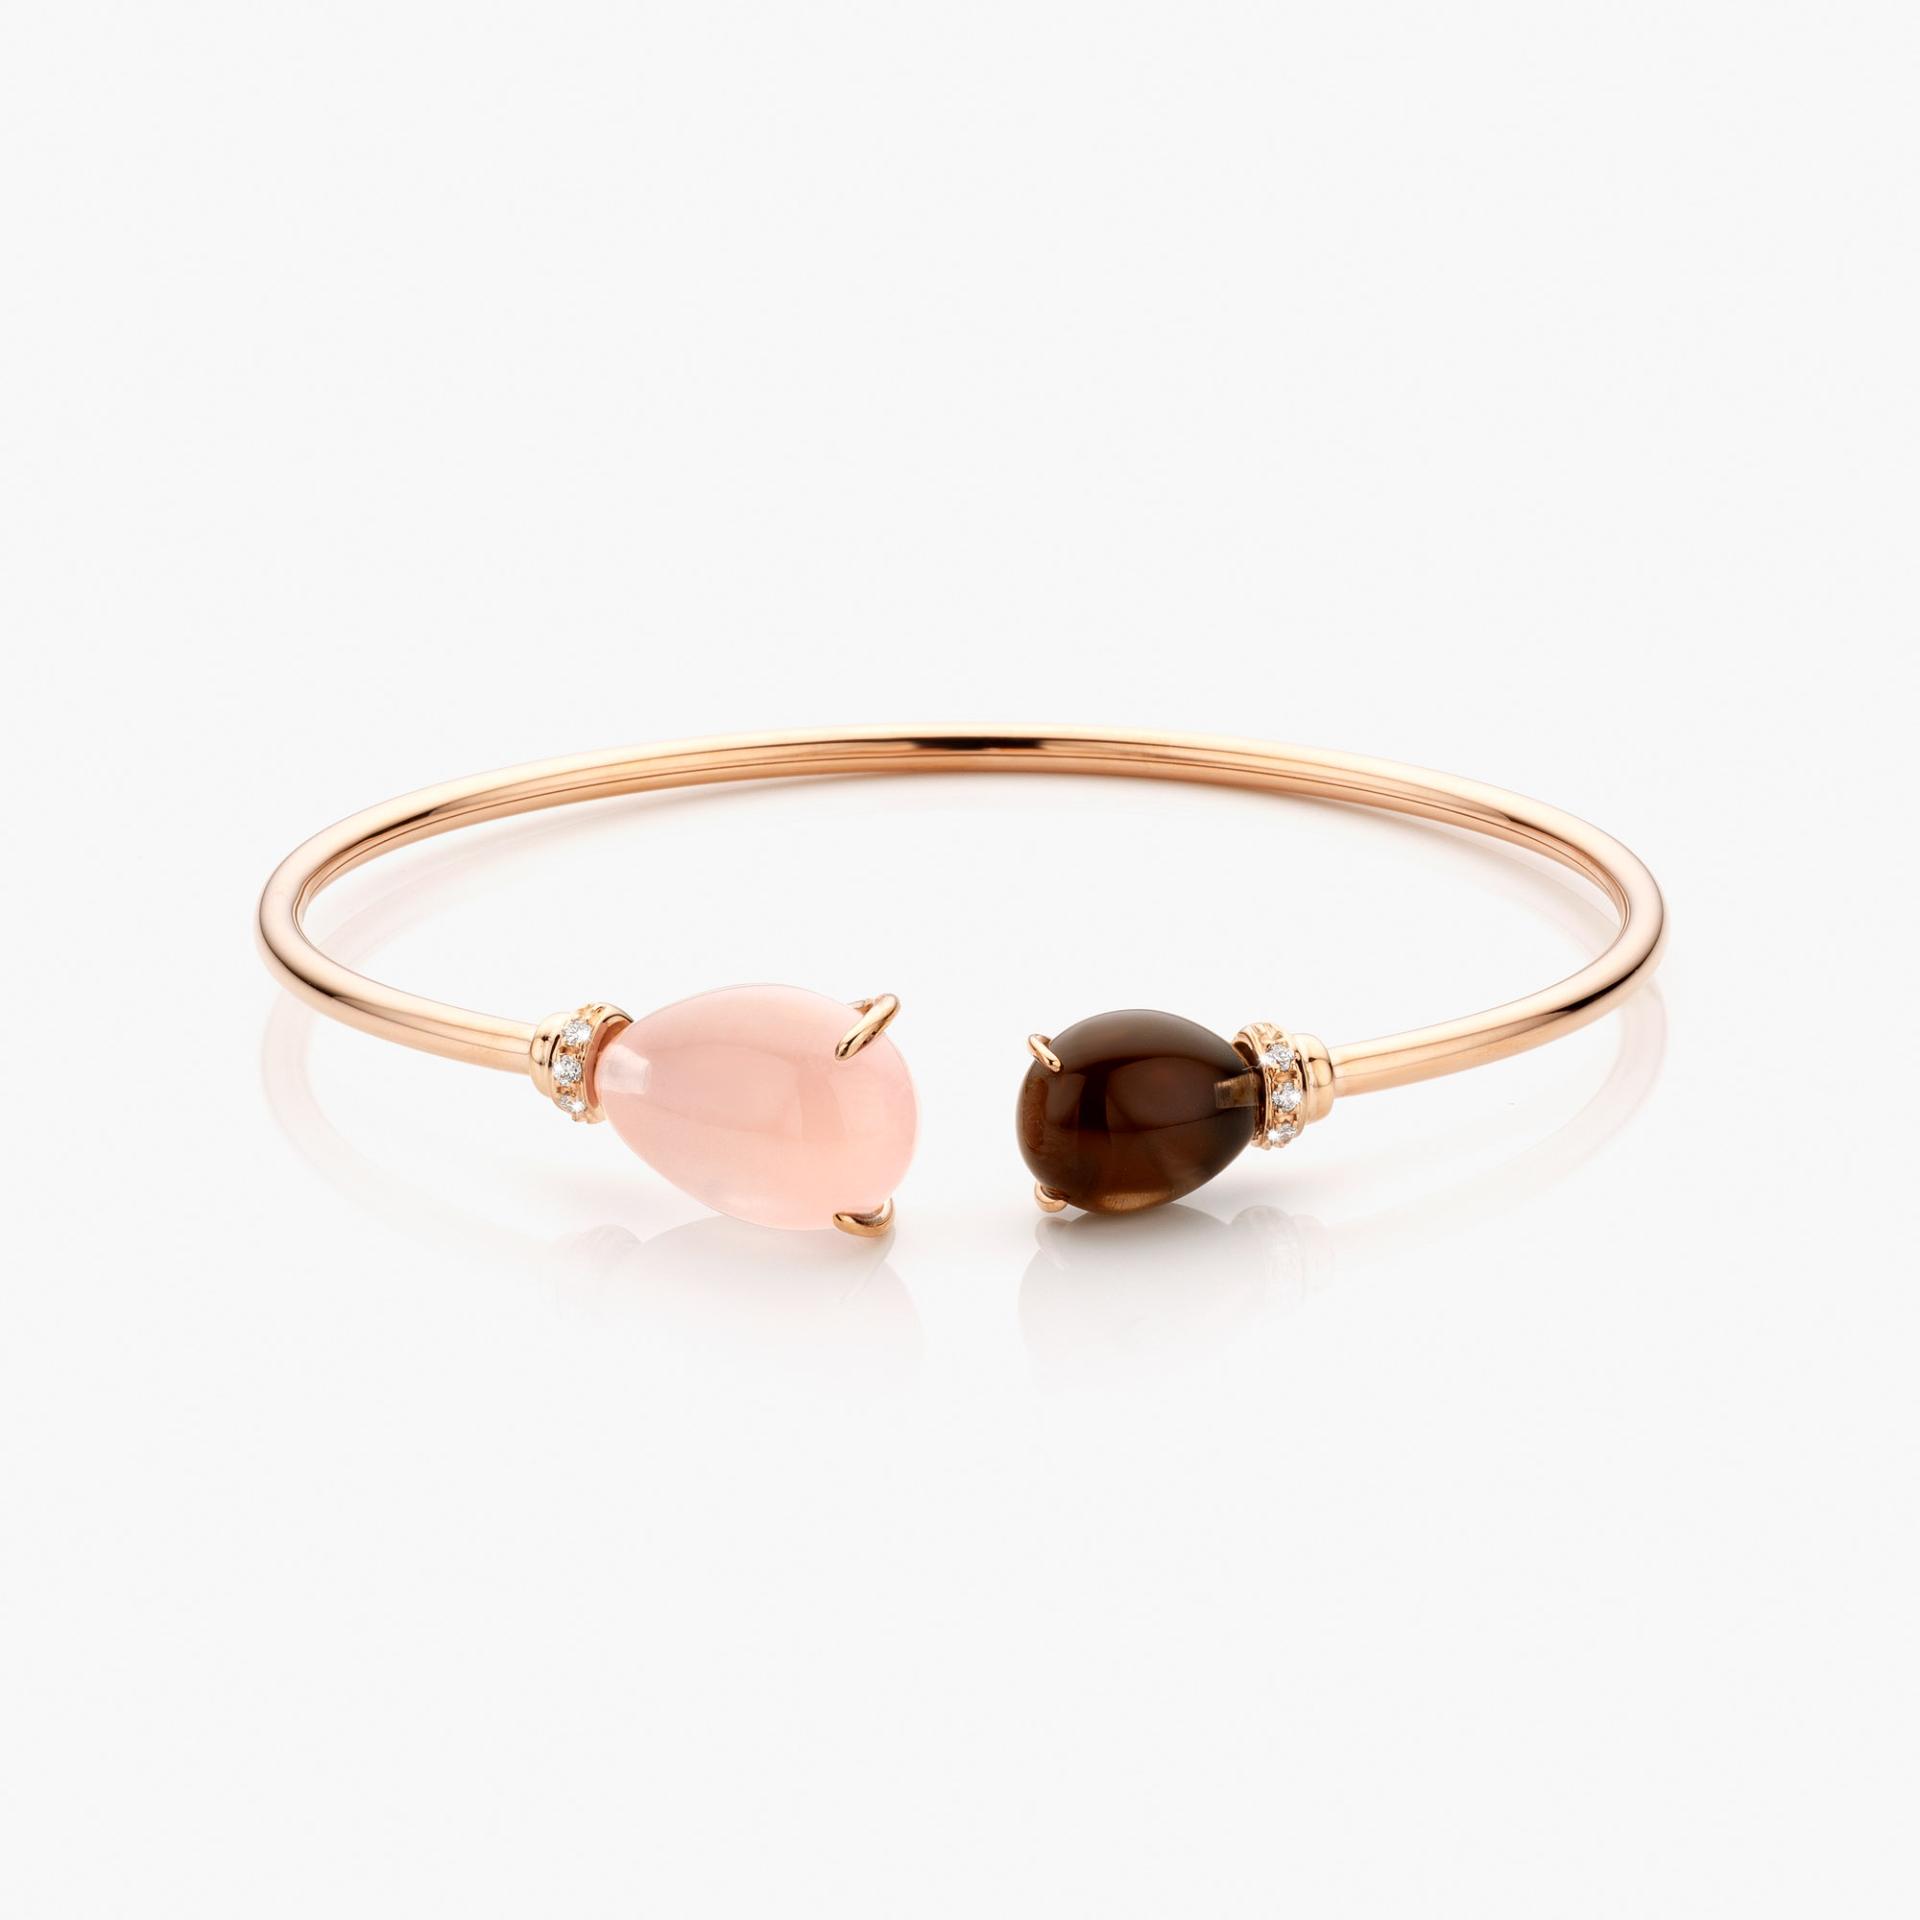 Rose gold bracelet set with brown and pink quartz and diamonds made by Maison De Greef